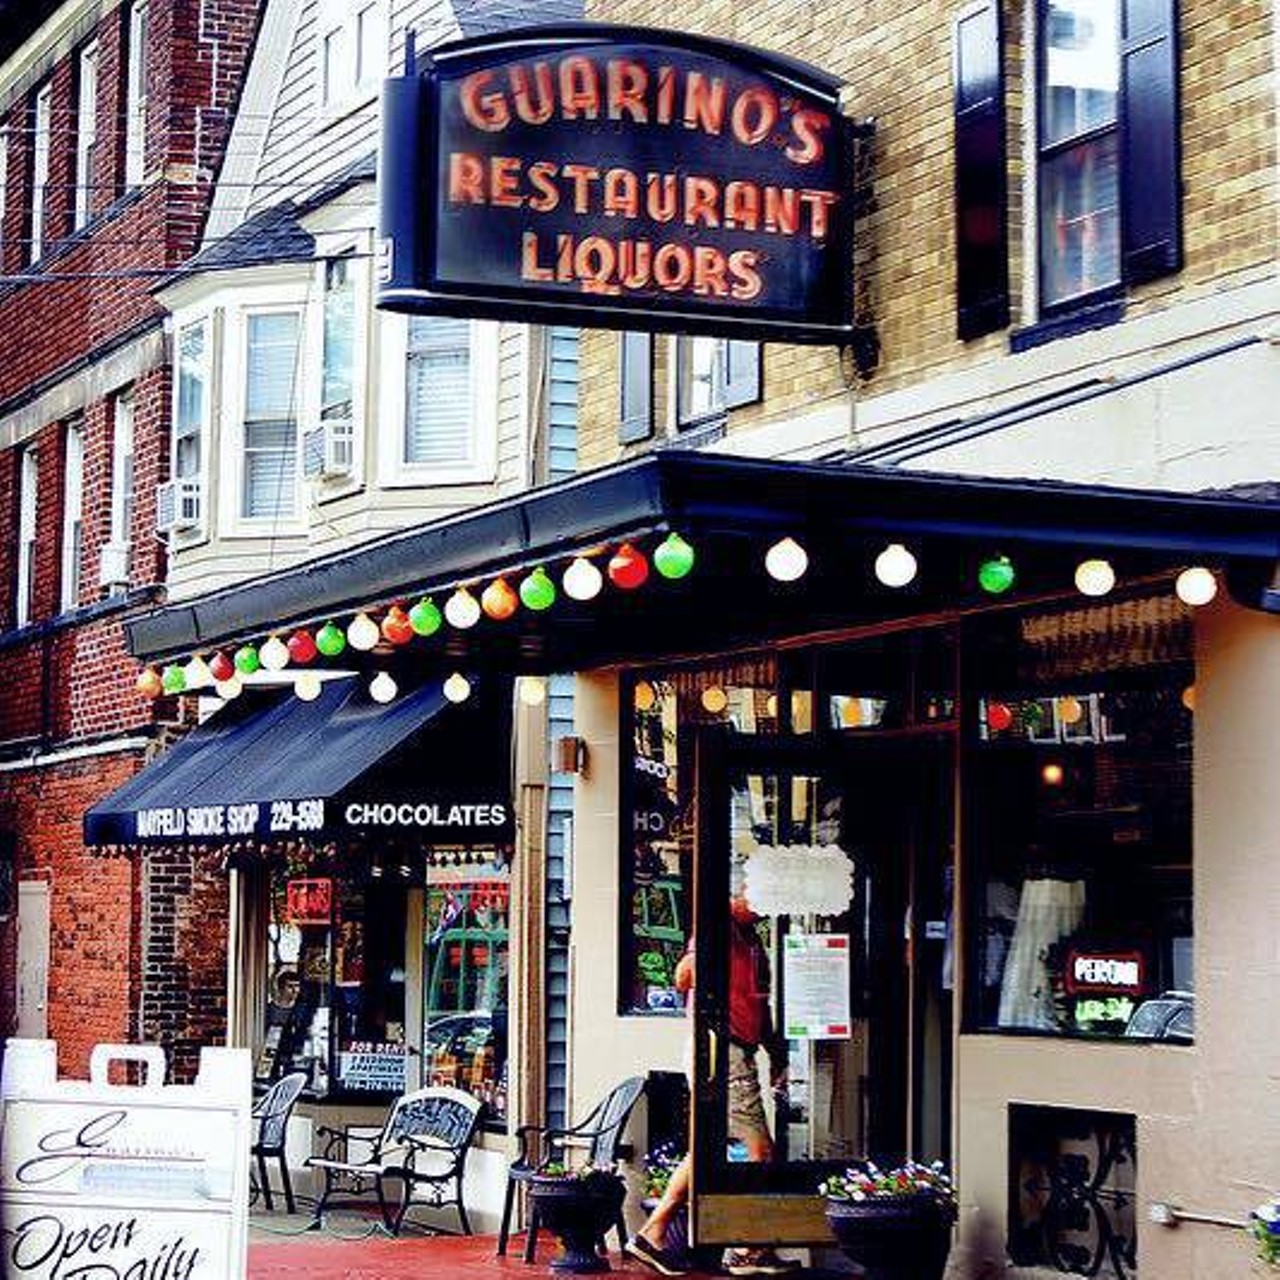  Guarino&#146;s
12309 Mayfield Rd., Cleveland 
Established in 1918, Guarino's in Little Italy is Cleveland's oldest restaurants and is still a family operation. The old world decor tends toward Victoriana and the kitchen's pasta, veal and seafood dishes are all Italian.
Photo via Guarino&#146;s/Facebook